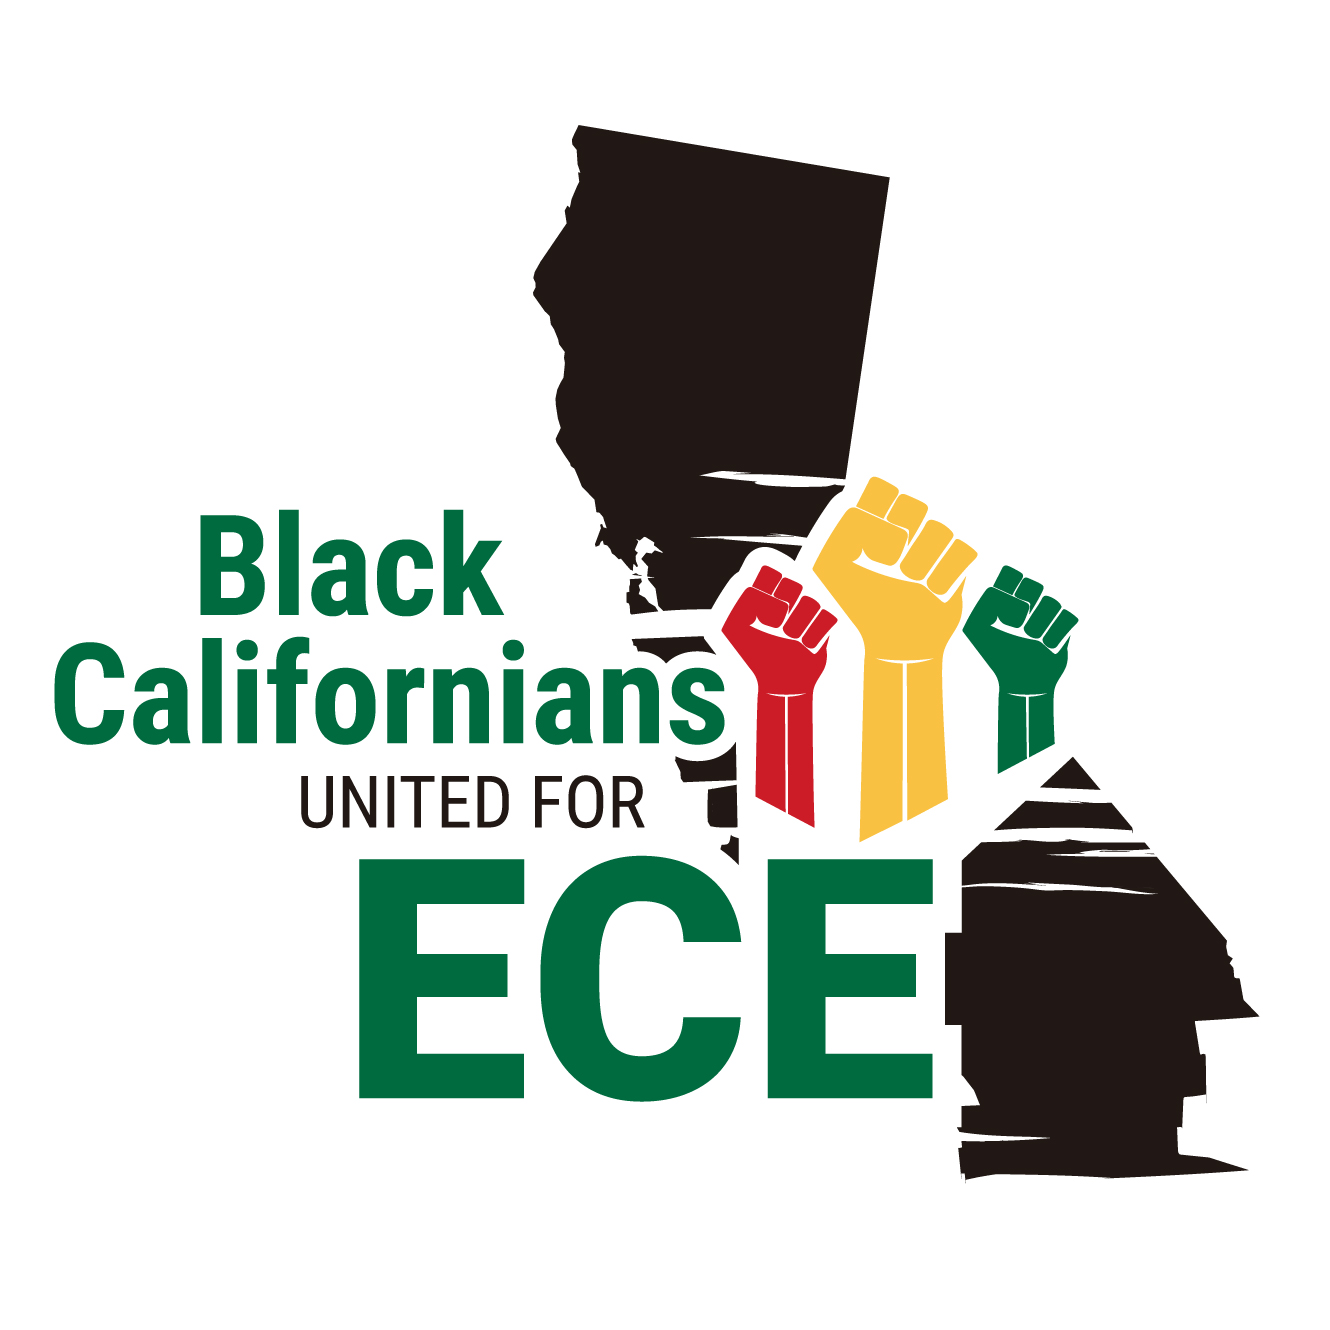 Black Californians United for Early Care & Education